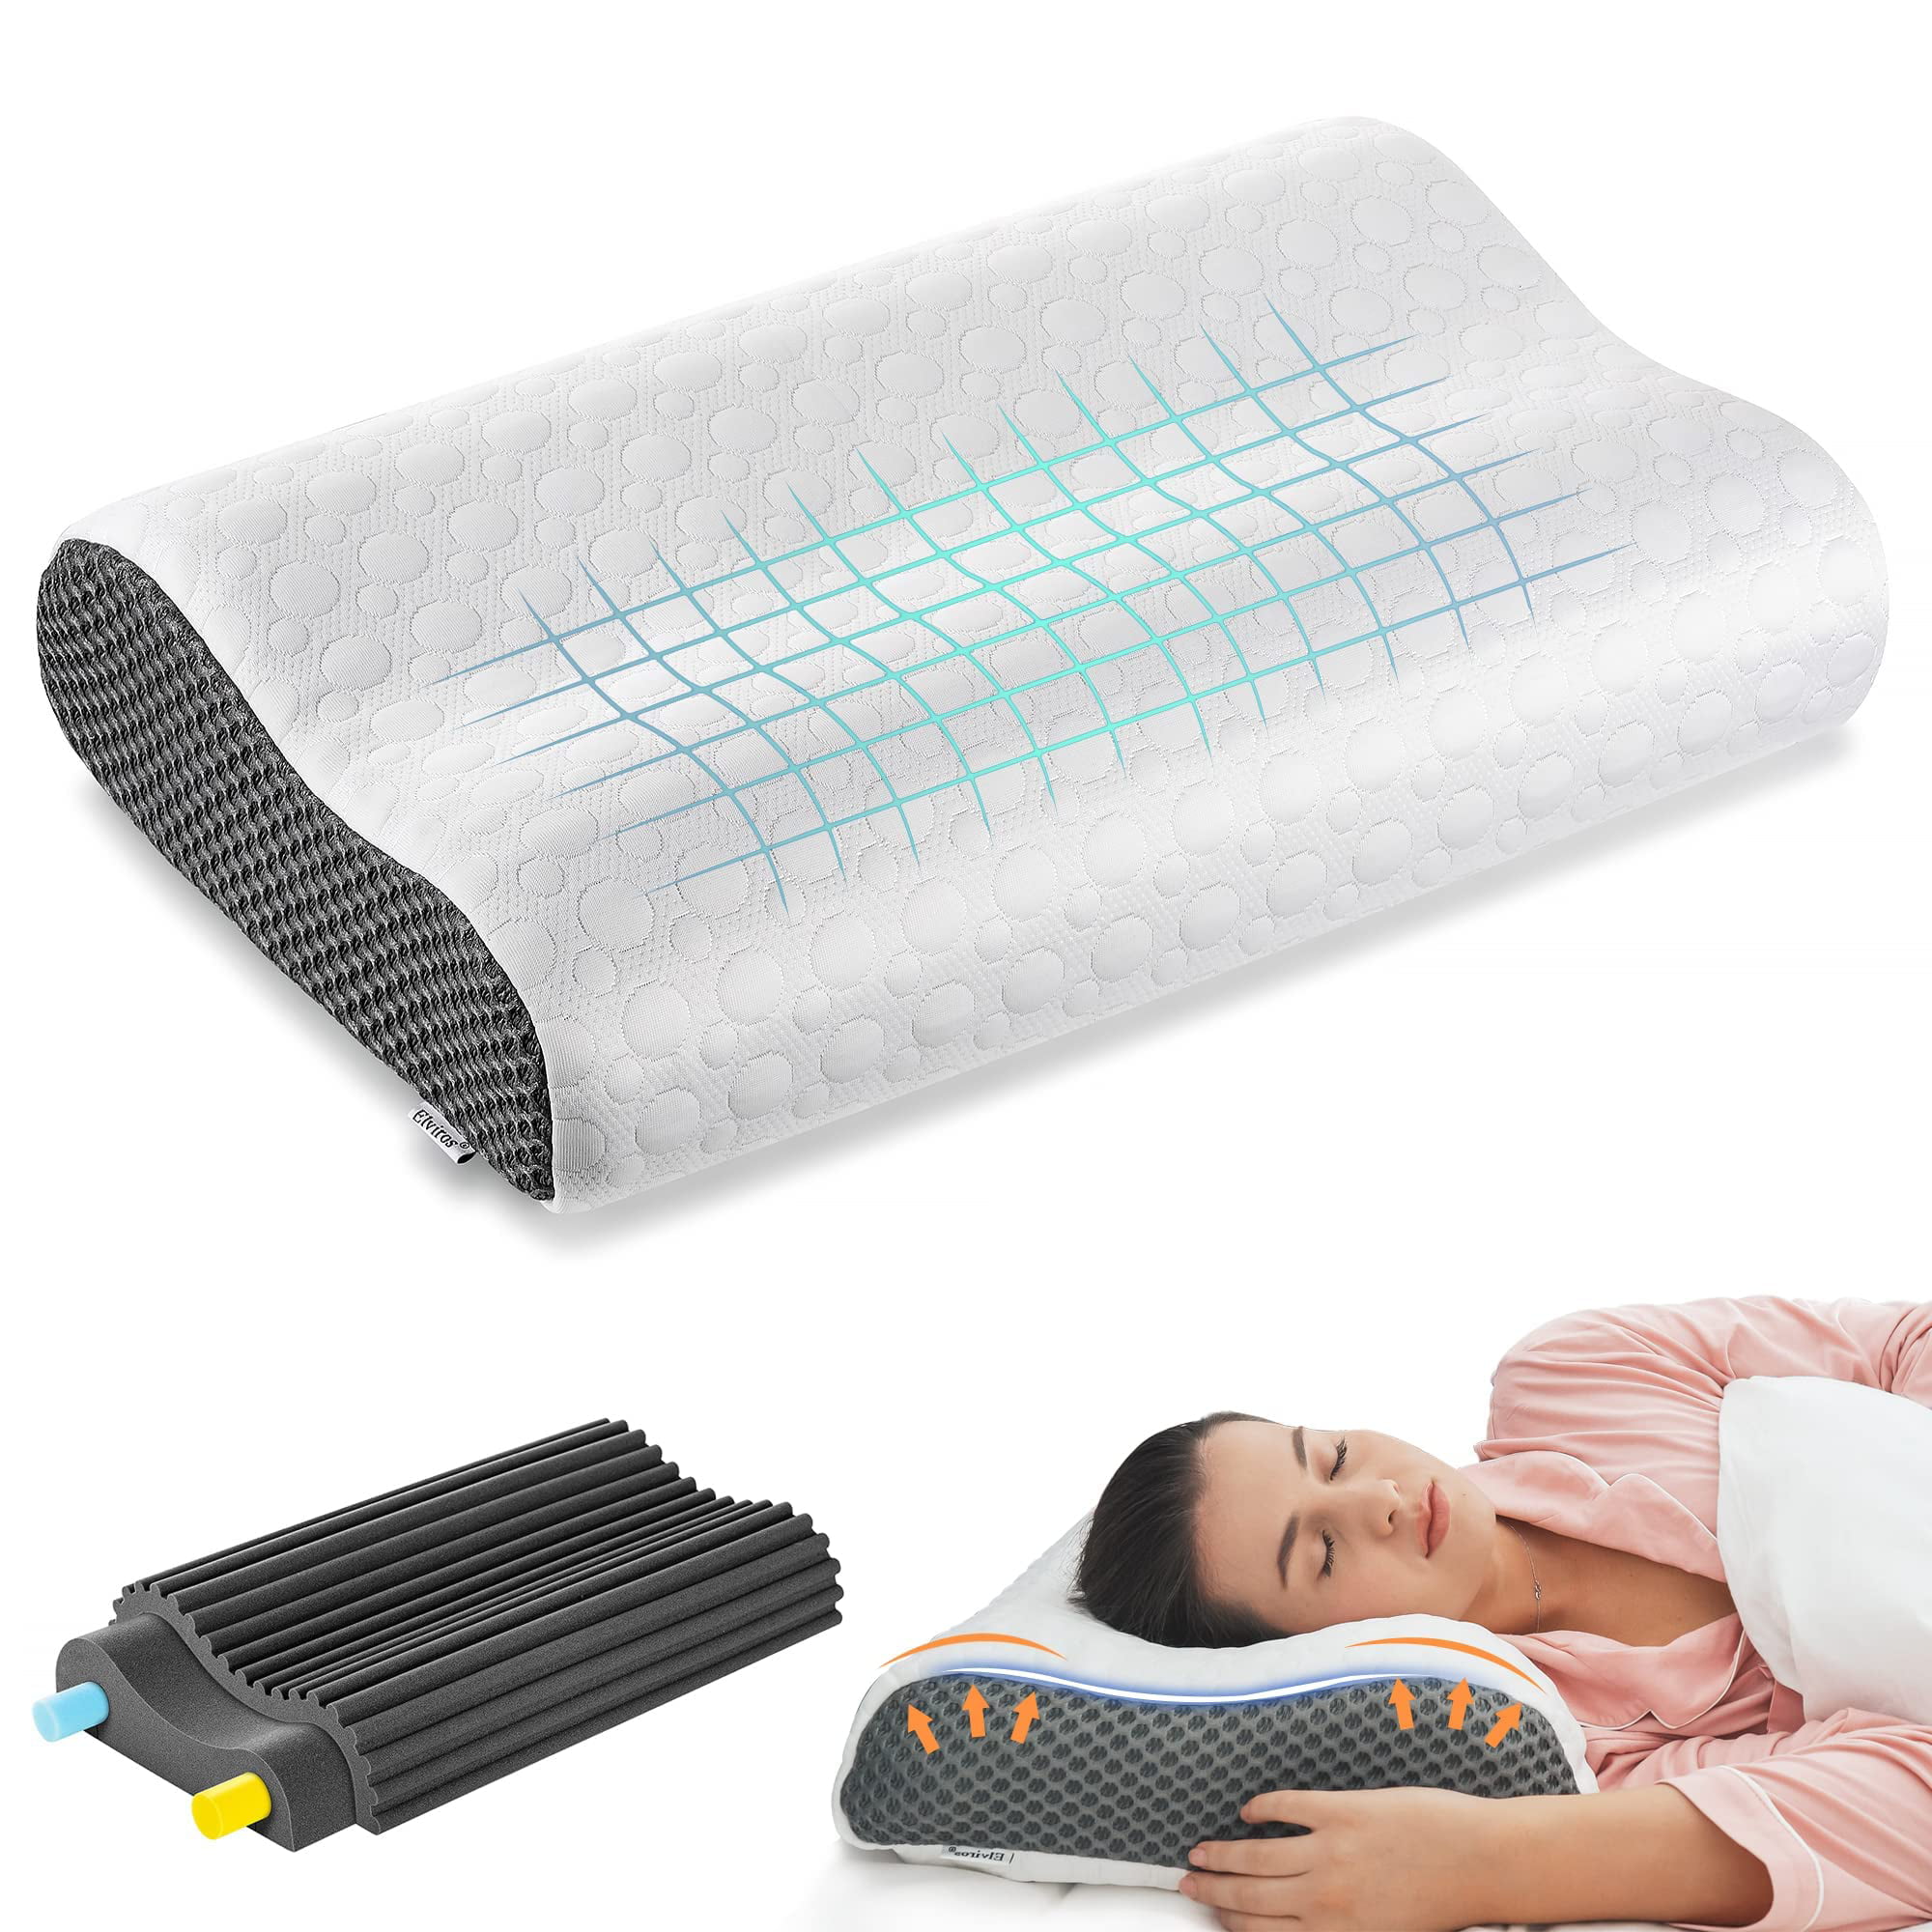 LUXFFY Memory Foam Sleeping Pillow: Cervical Contour Pillows for Neck,  Adjustable Orthopedic Sandwich Pillows, Neck Support Memory Pillow for  Back, Stomach, Side Sleepers